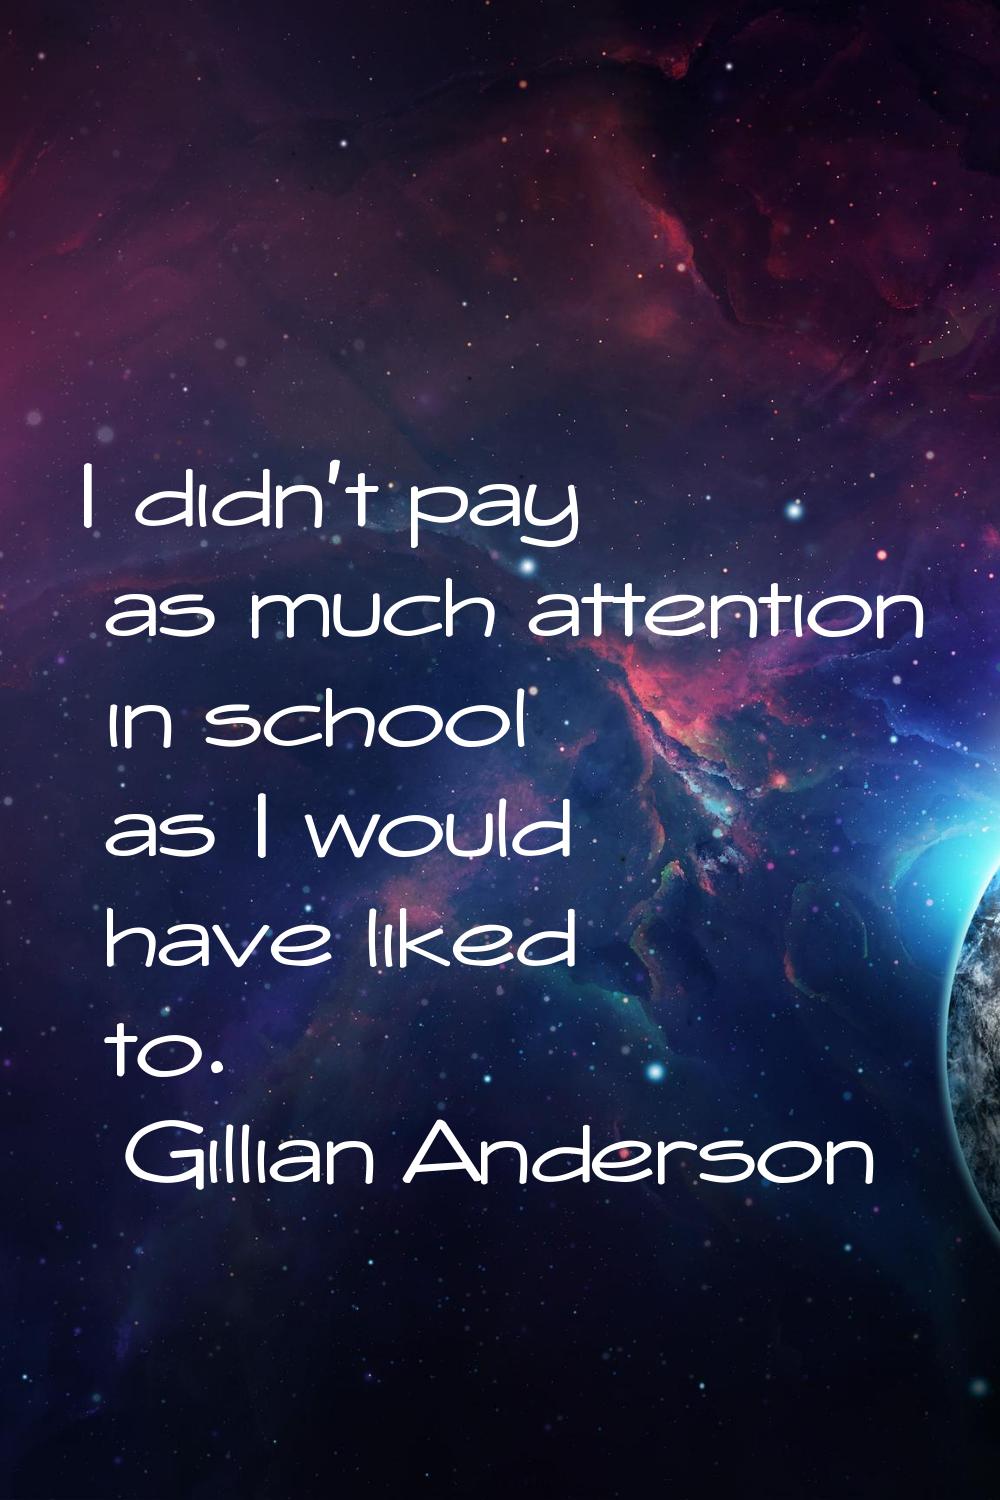 I didn't pay as much attention in school as I would have liked to.